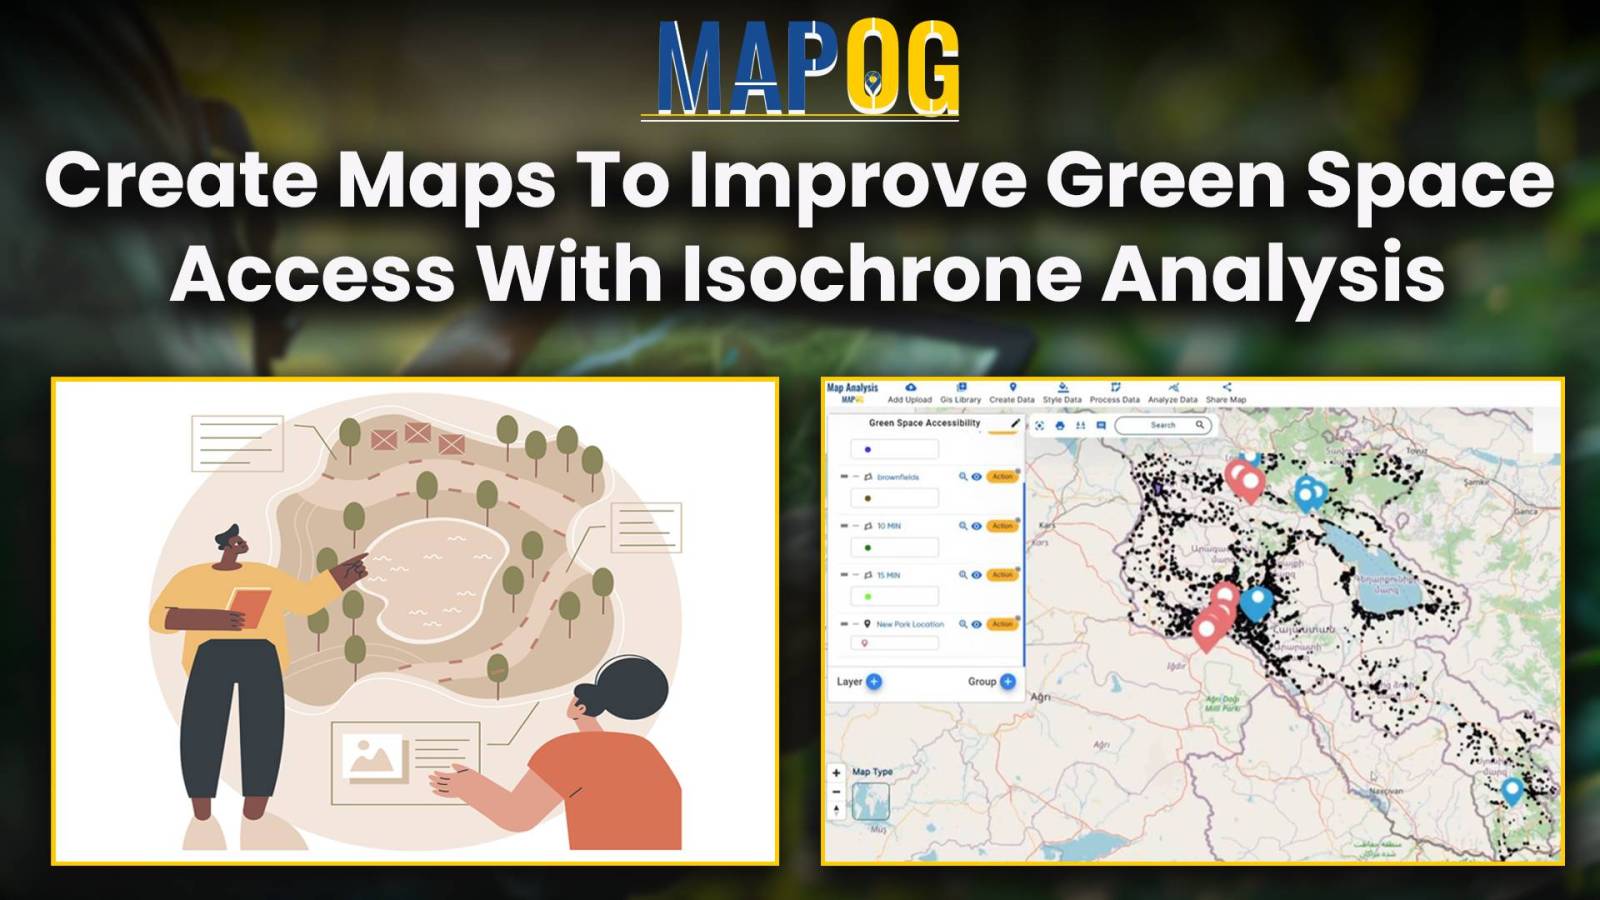 Create Maps to Improve Green Space Access with Isochrone Analysis